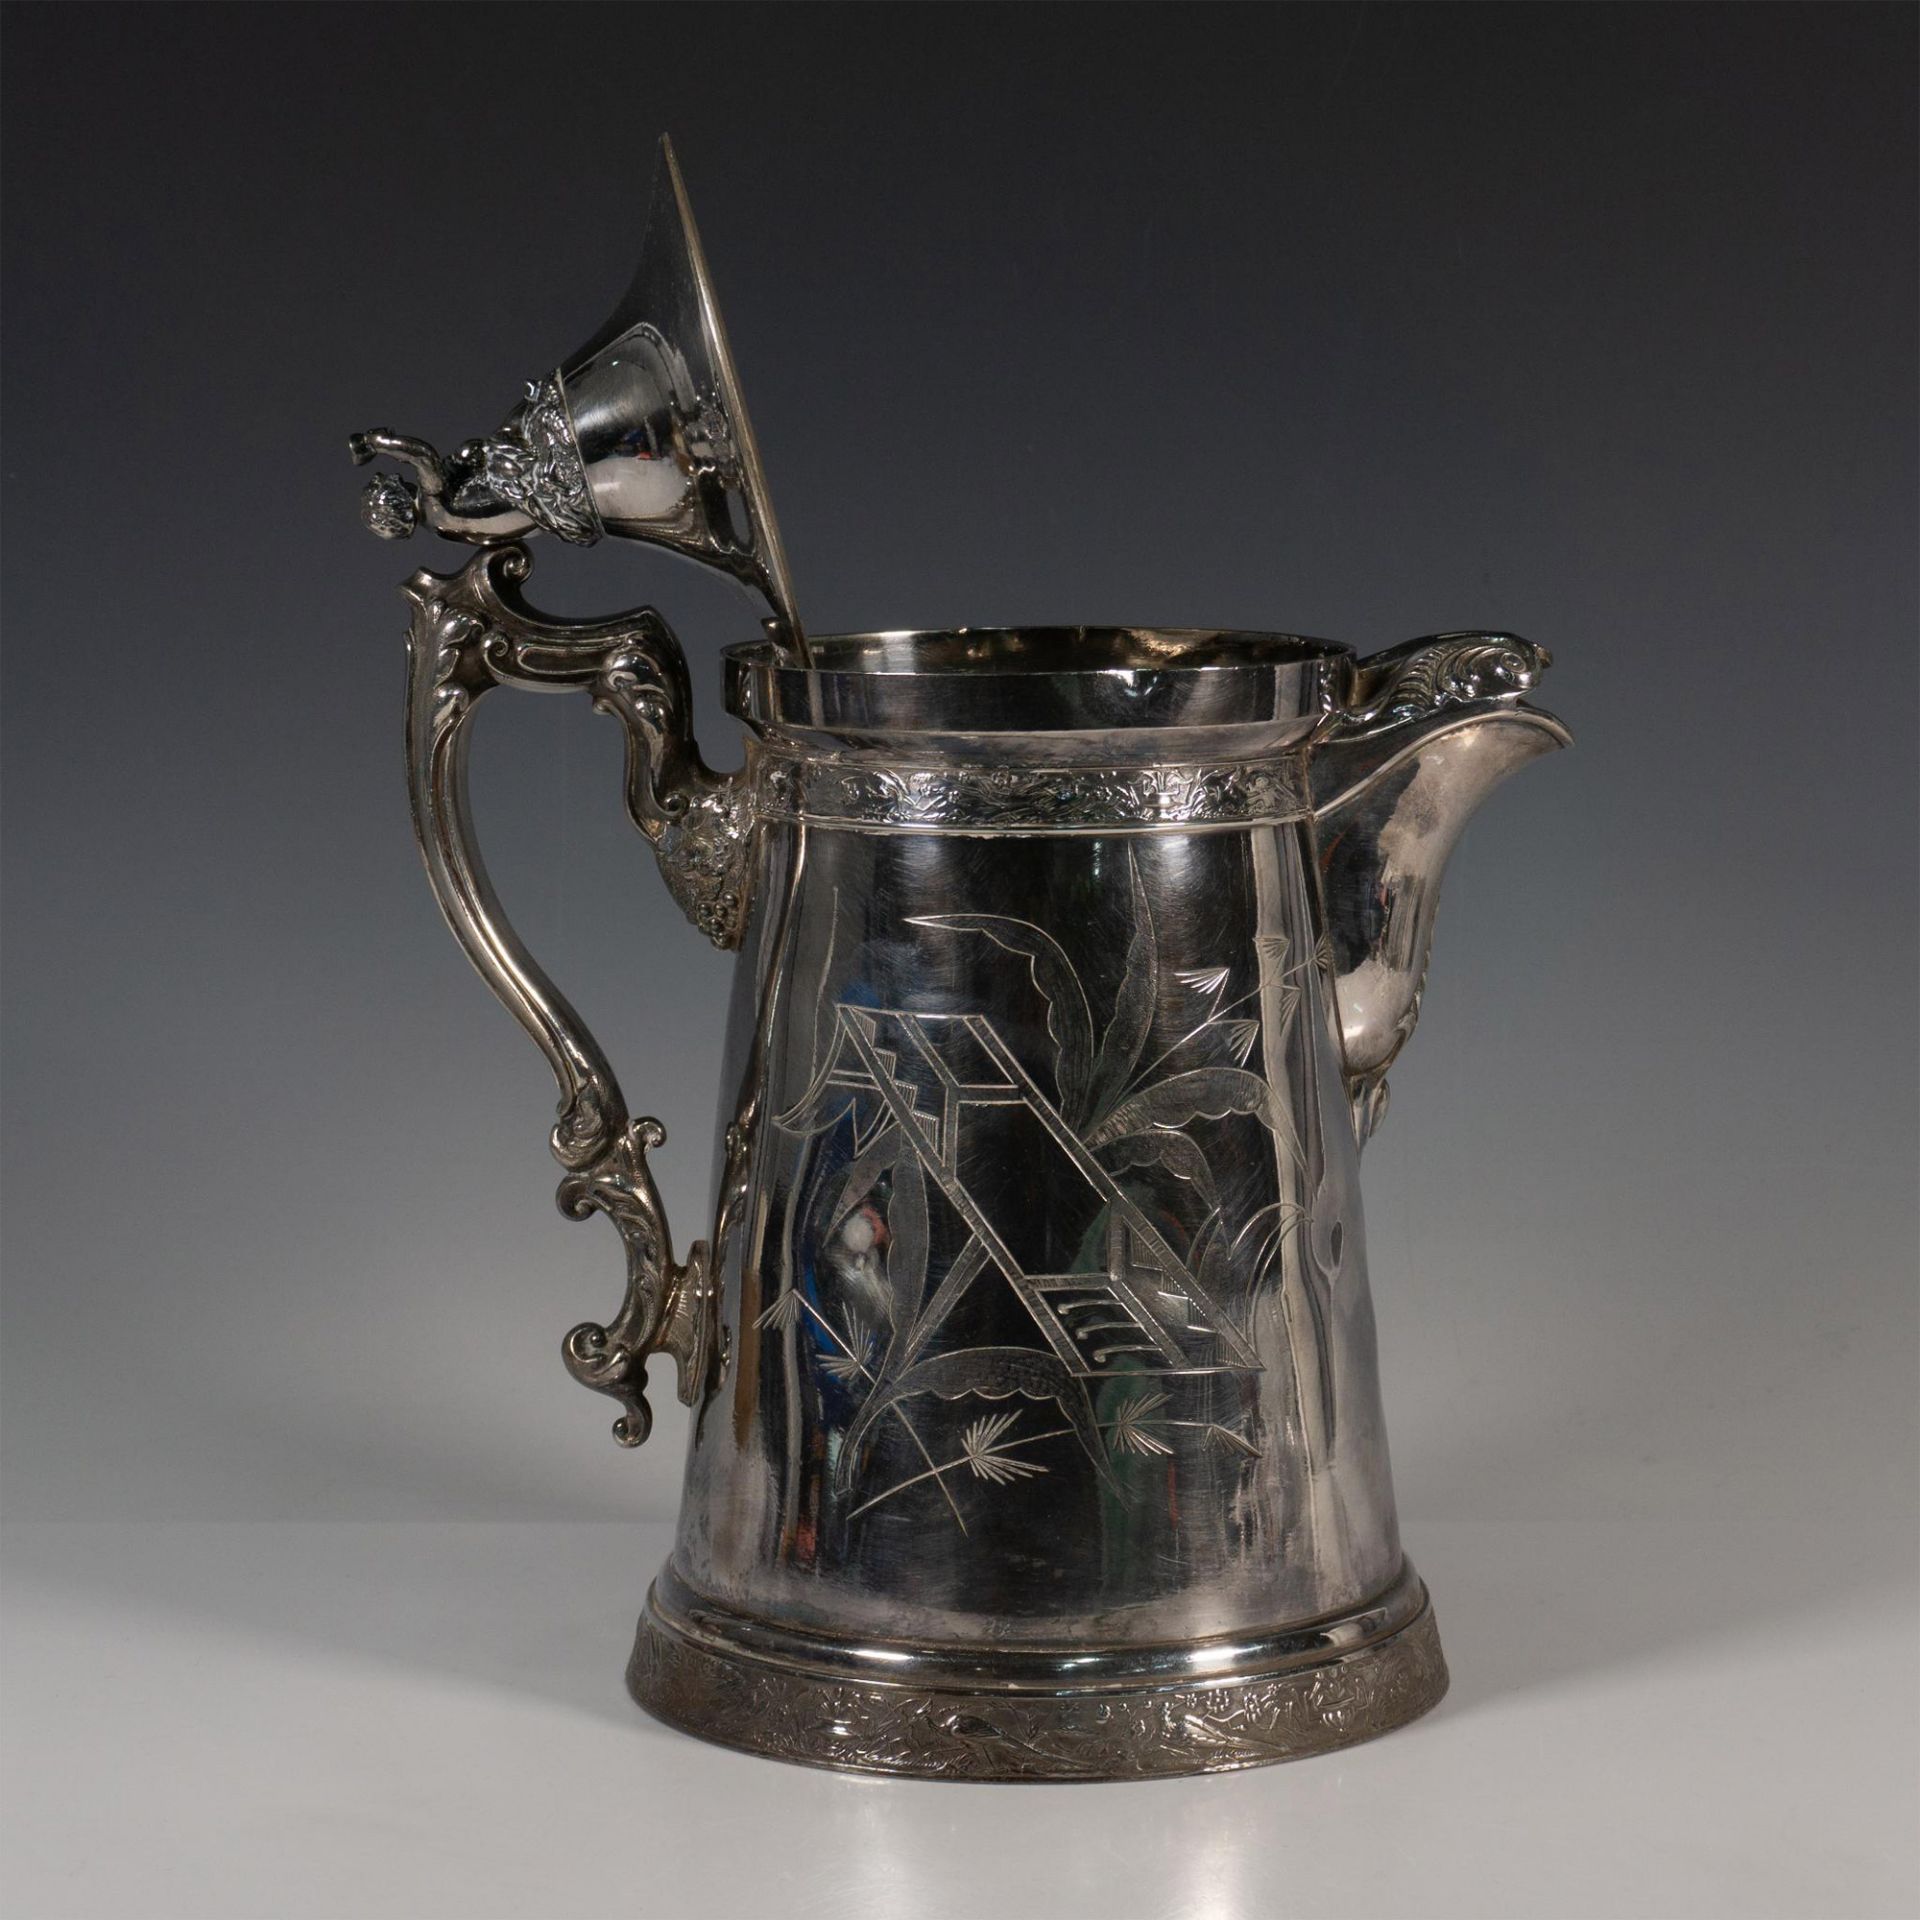 Original Victorian Large Silverplate Pitcher with Cupid Top - Image 2 of 5